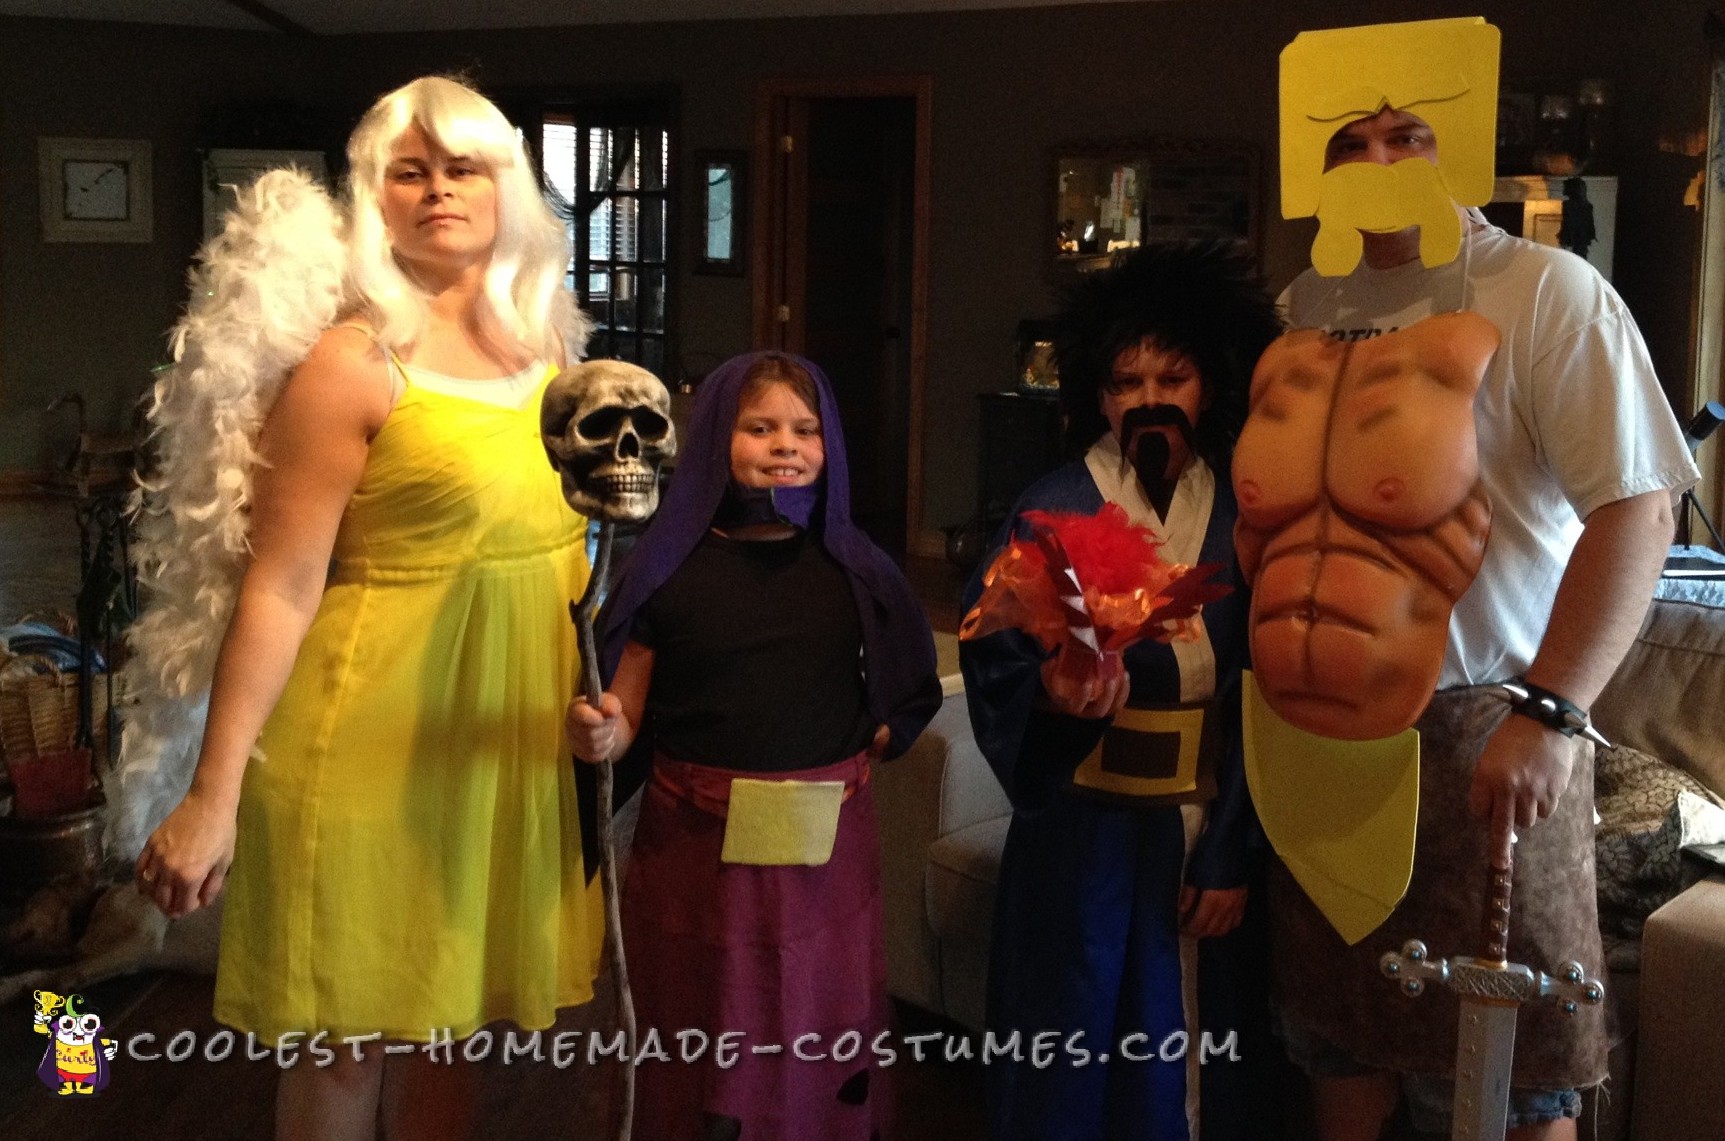 Clash of Clans Family Costume